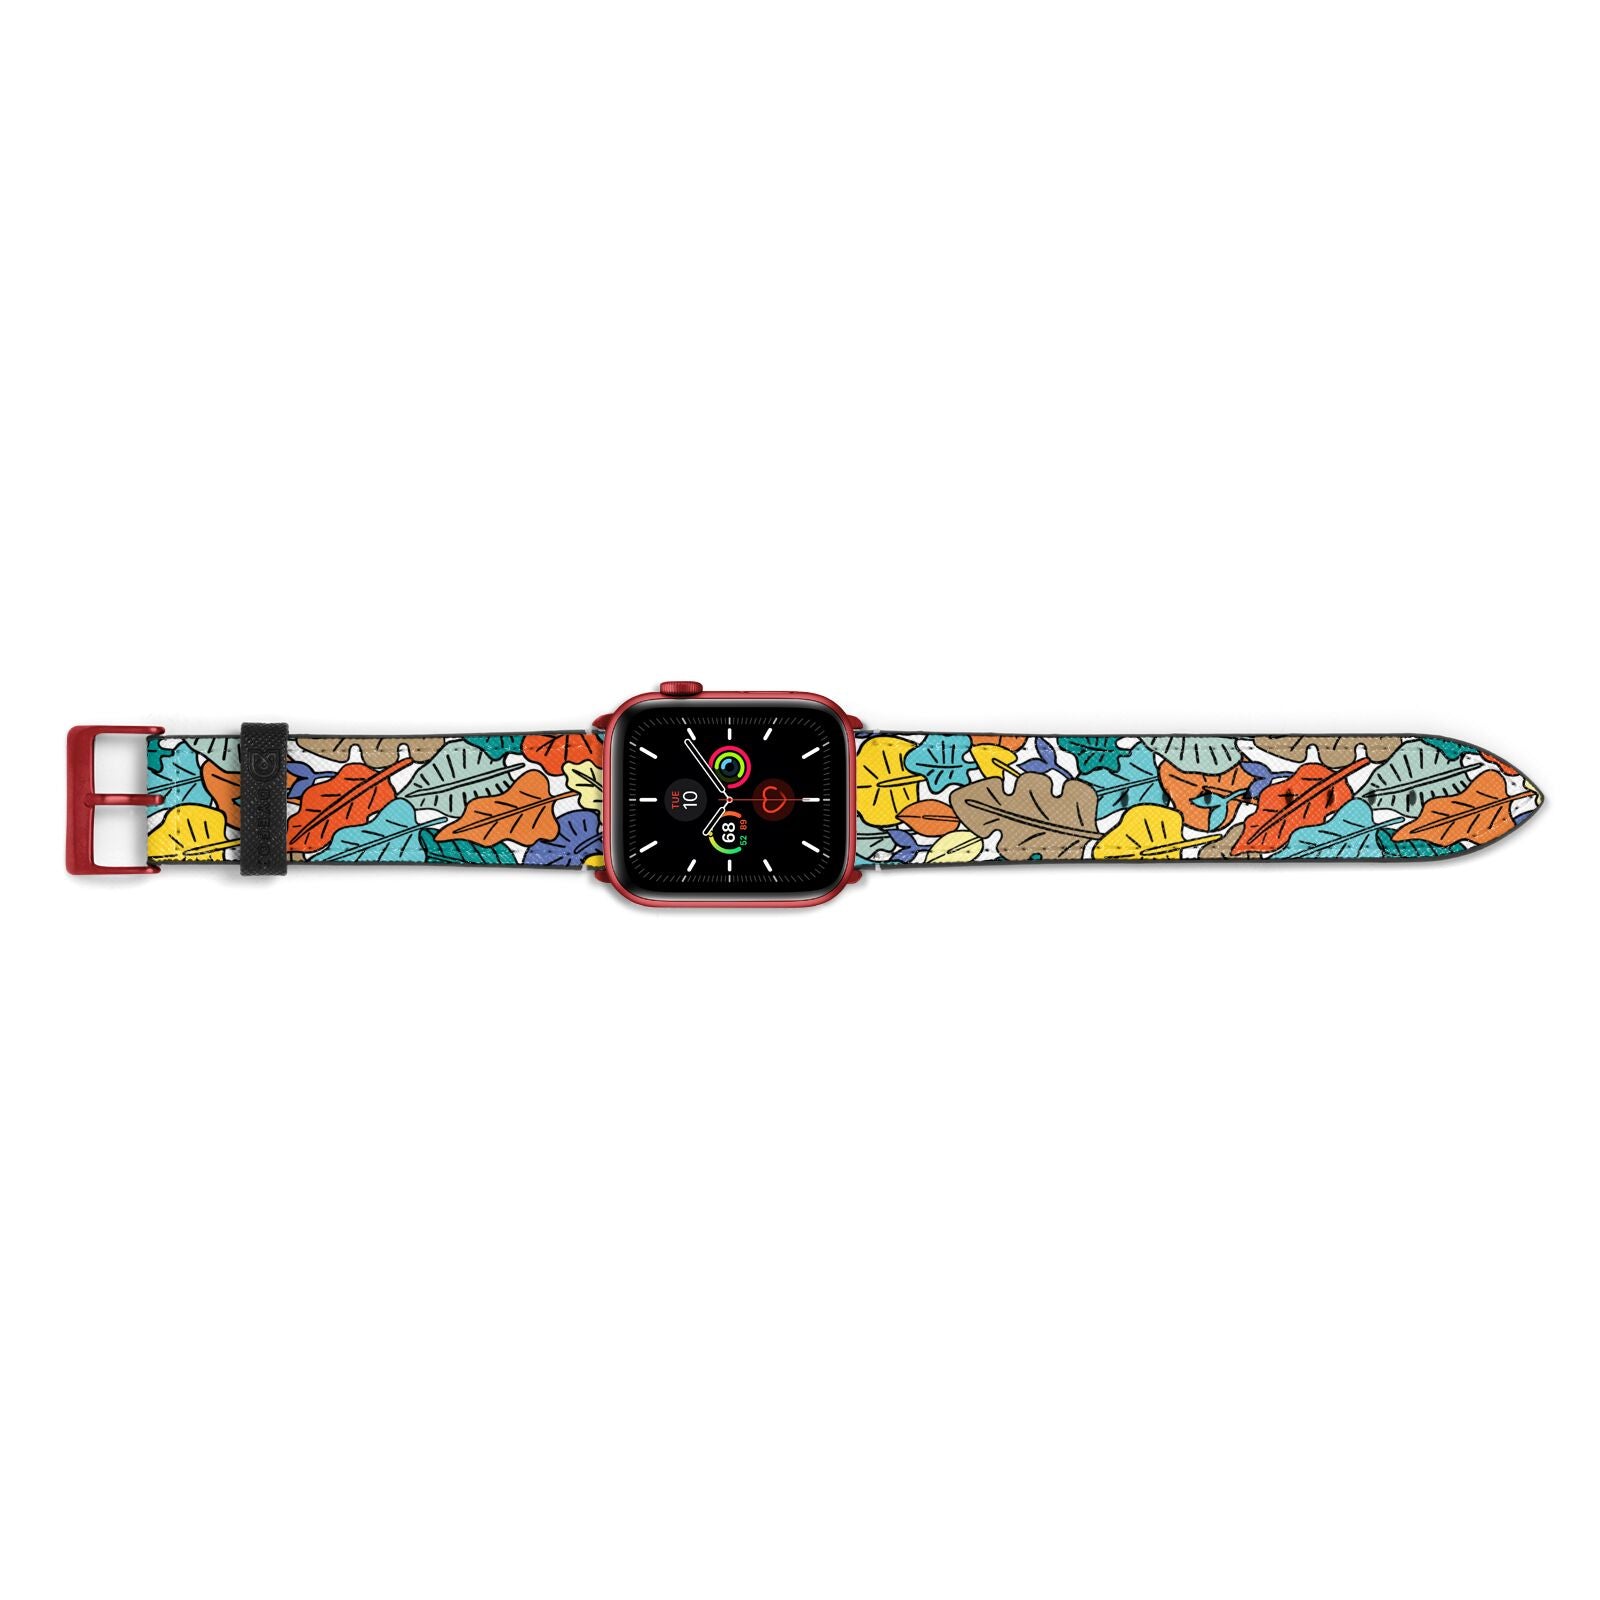 Autumn Leaves Apple Watch Strap Landscape Image Red Hardware